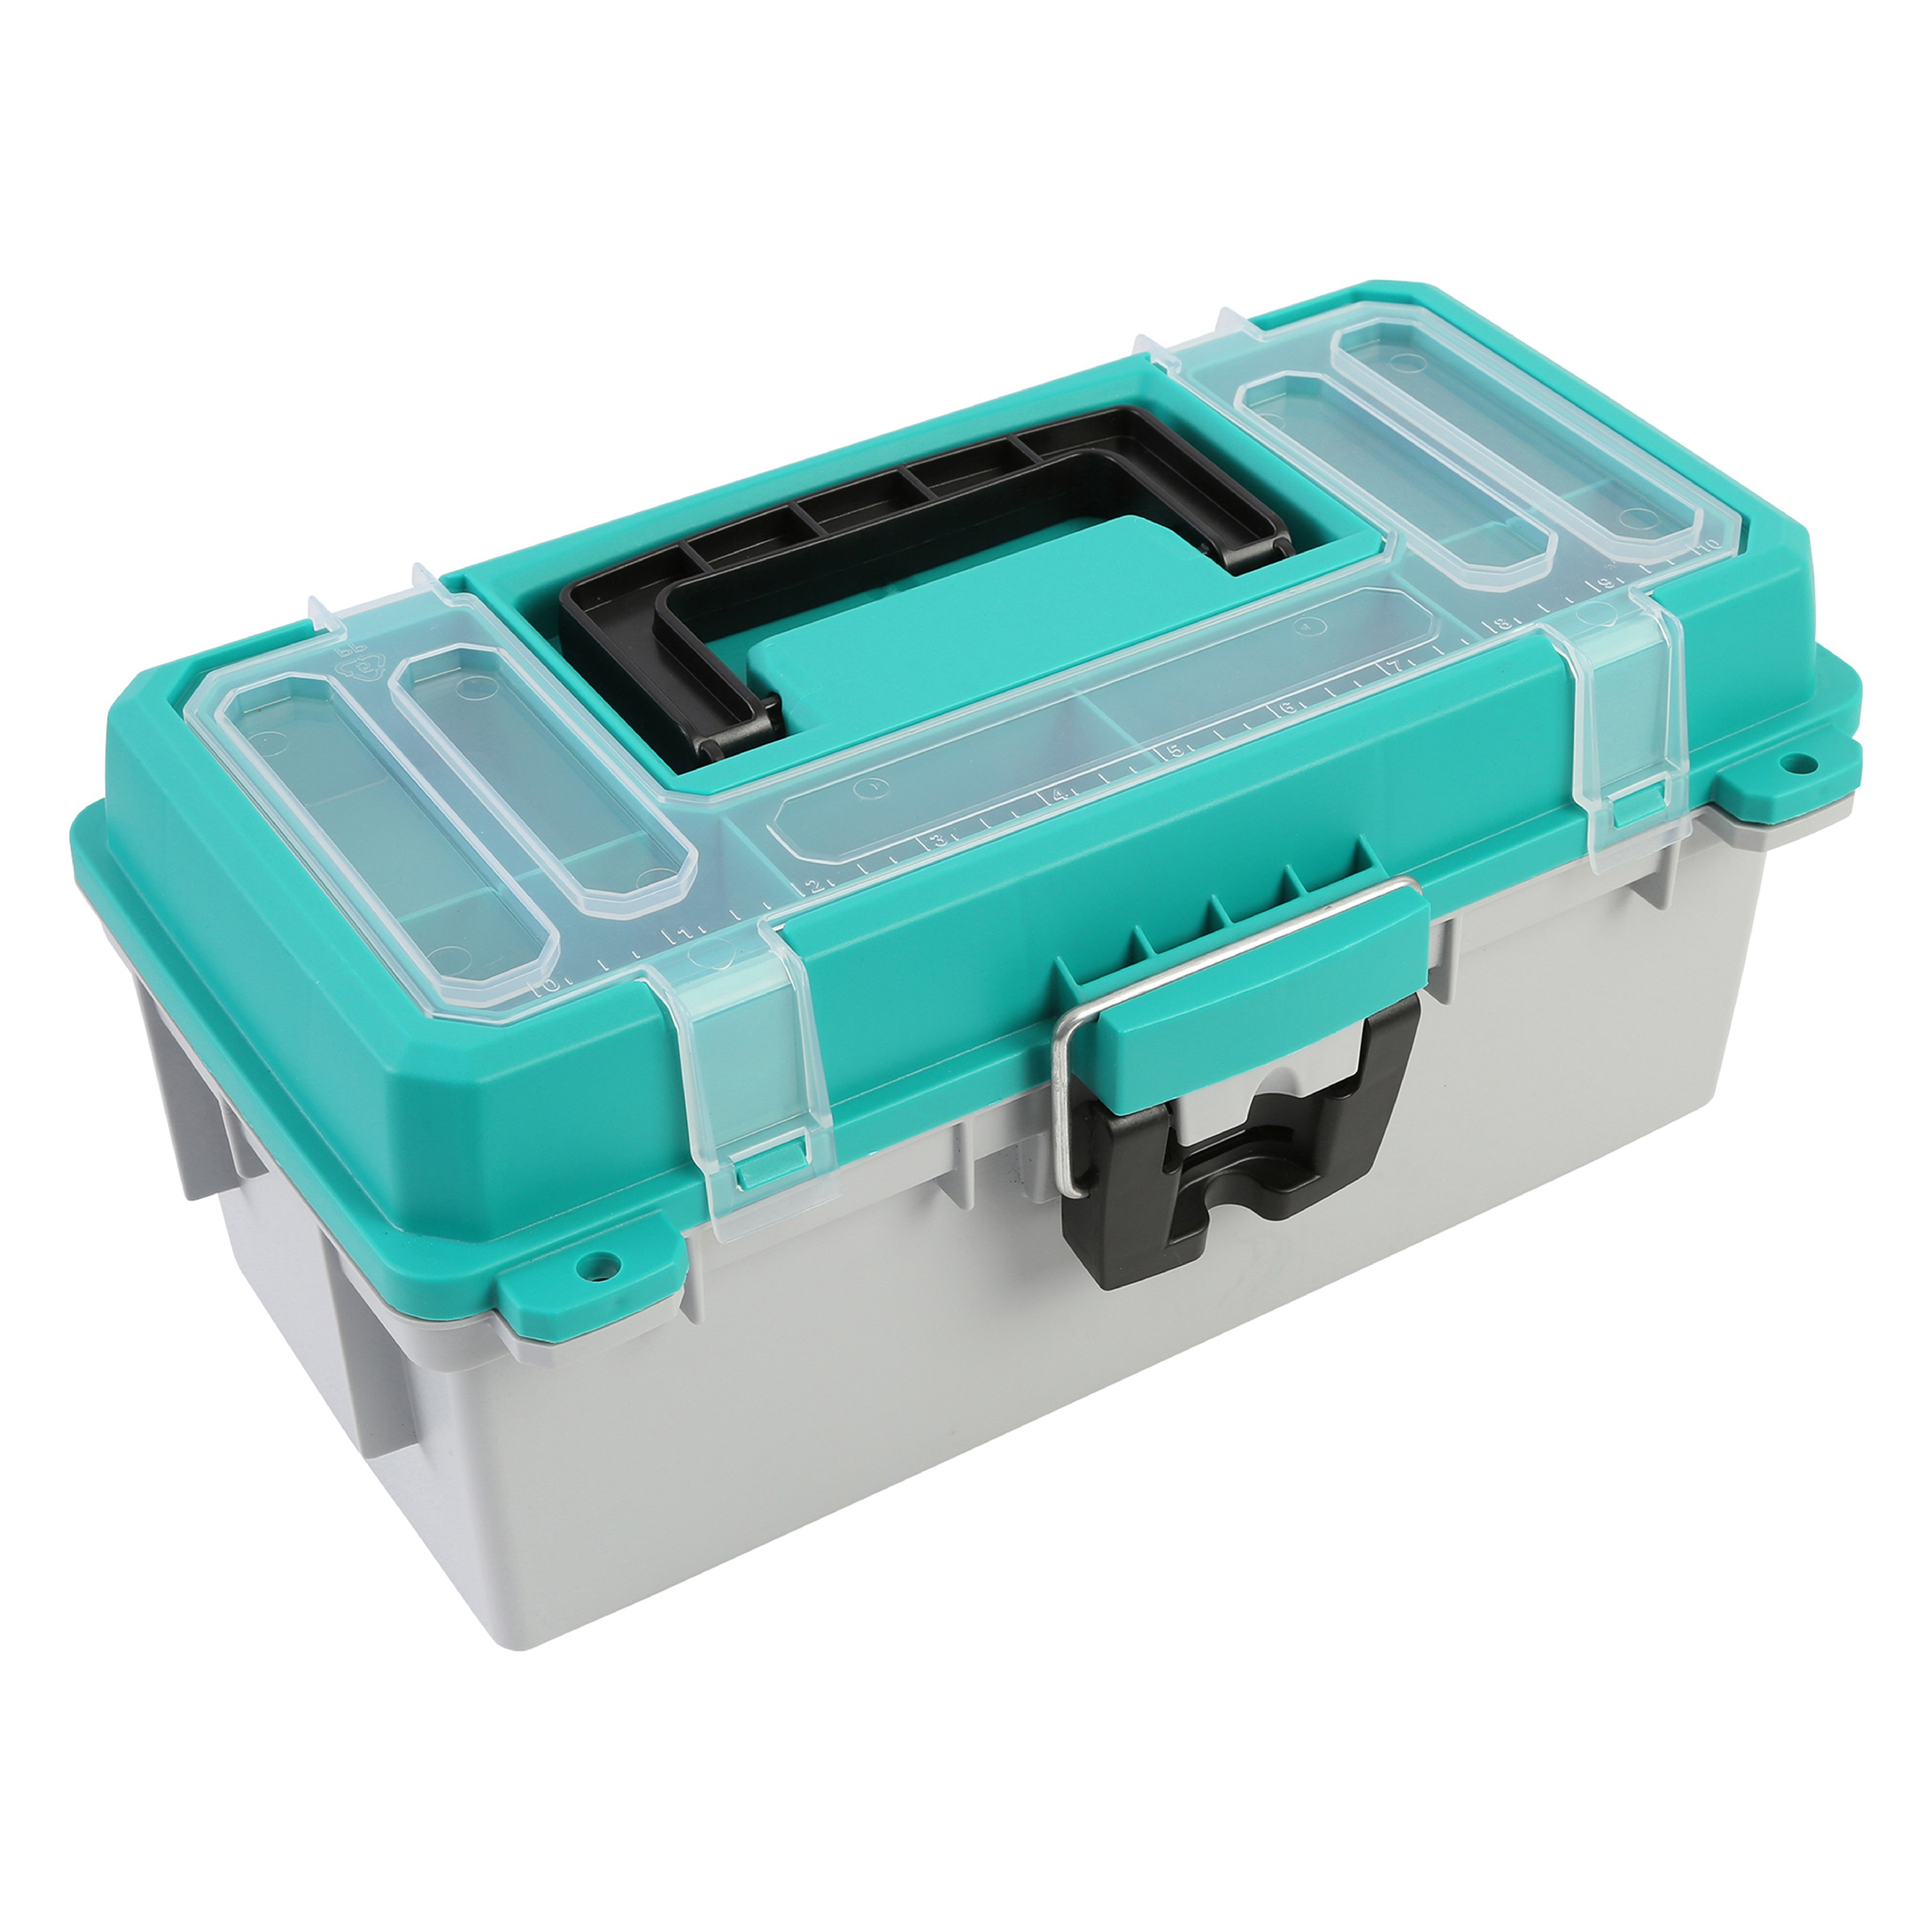 Sheffield 13 Tackle Box 8-in Multiple Colors/Finishes Plastic